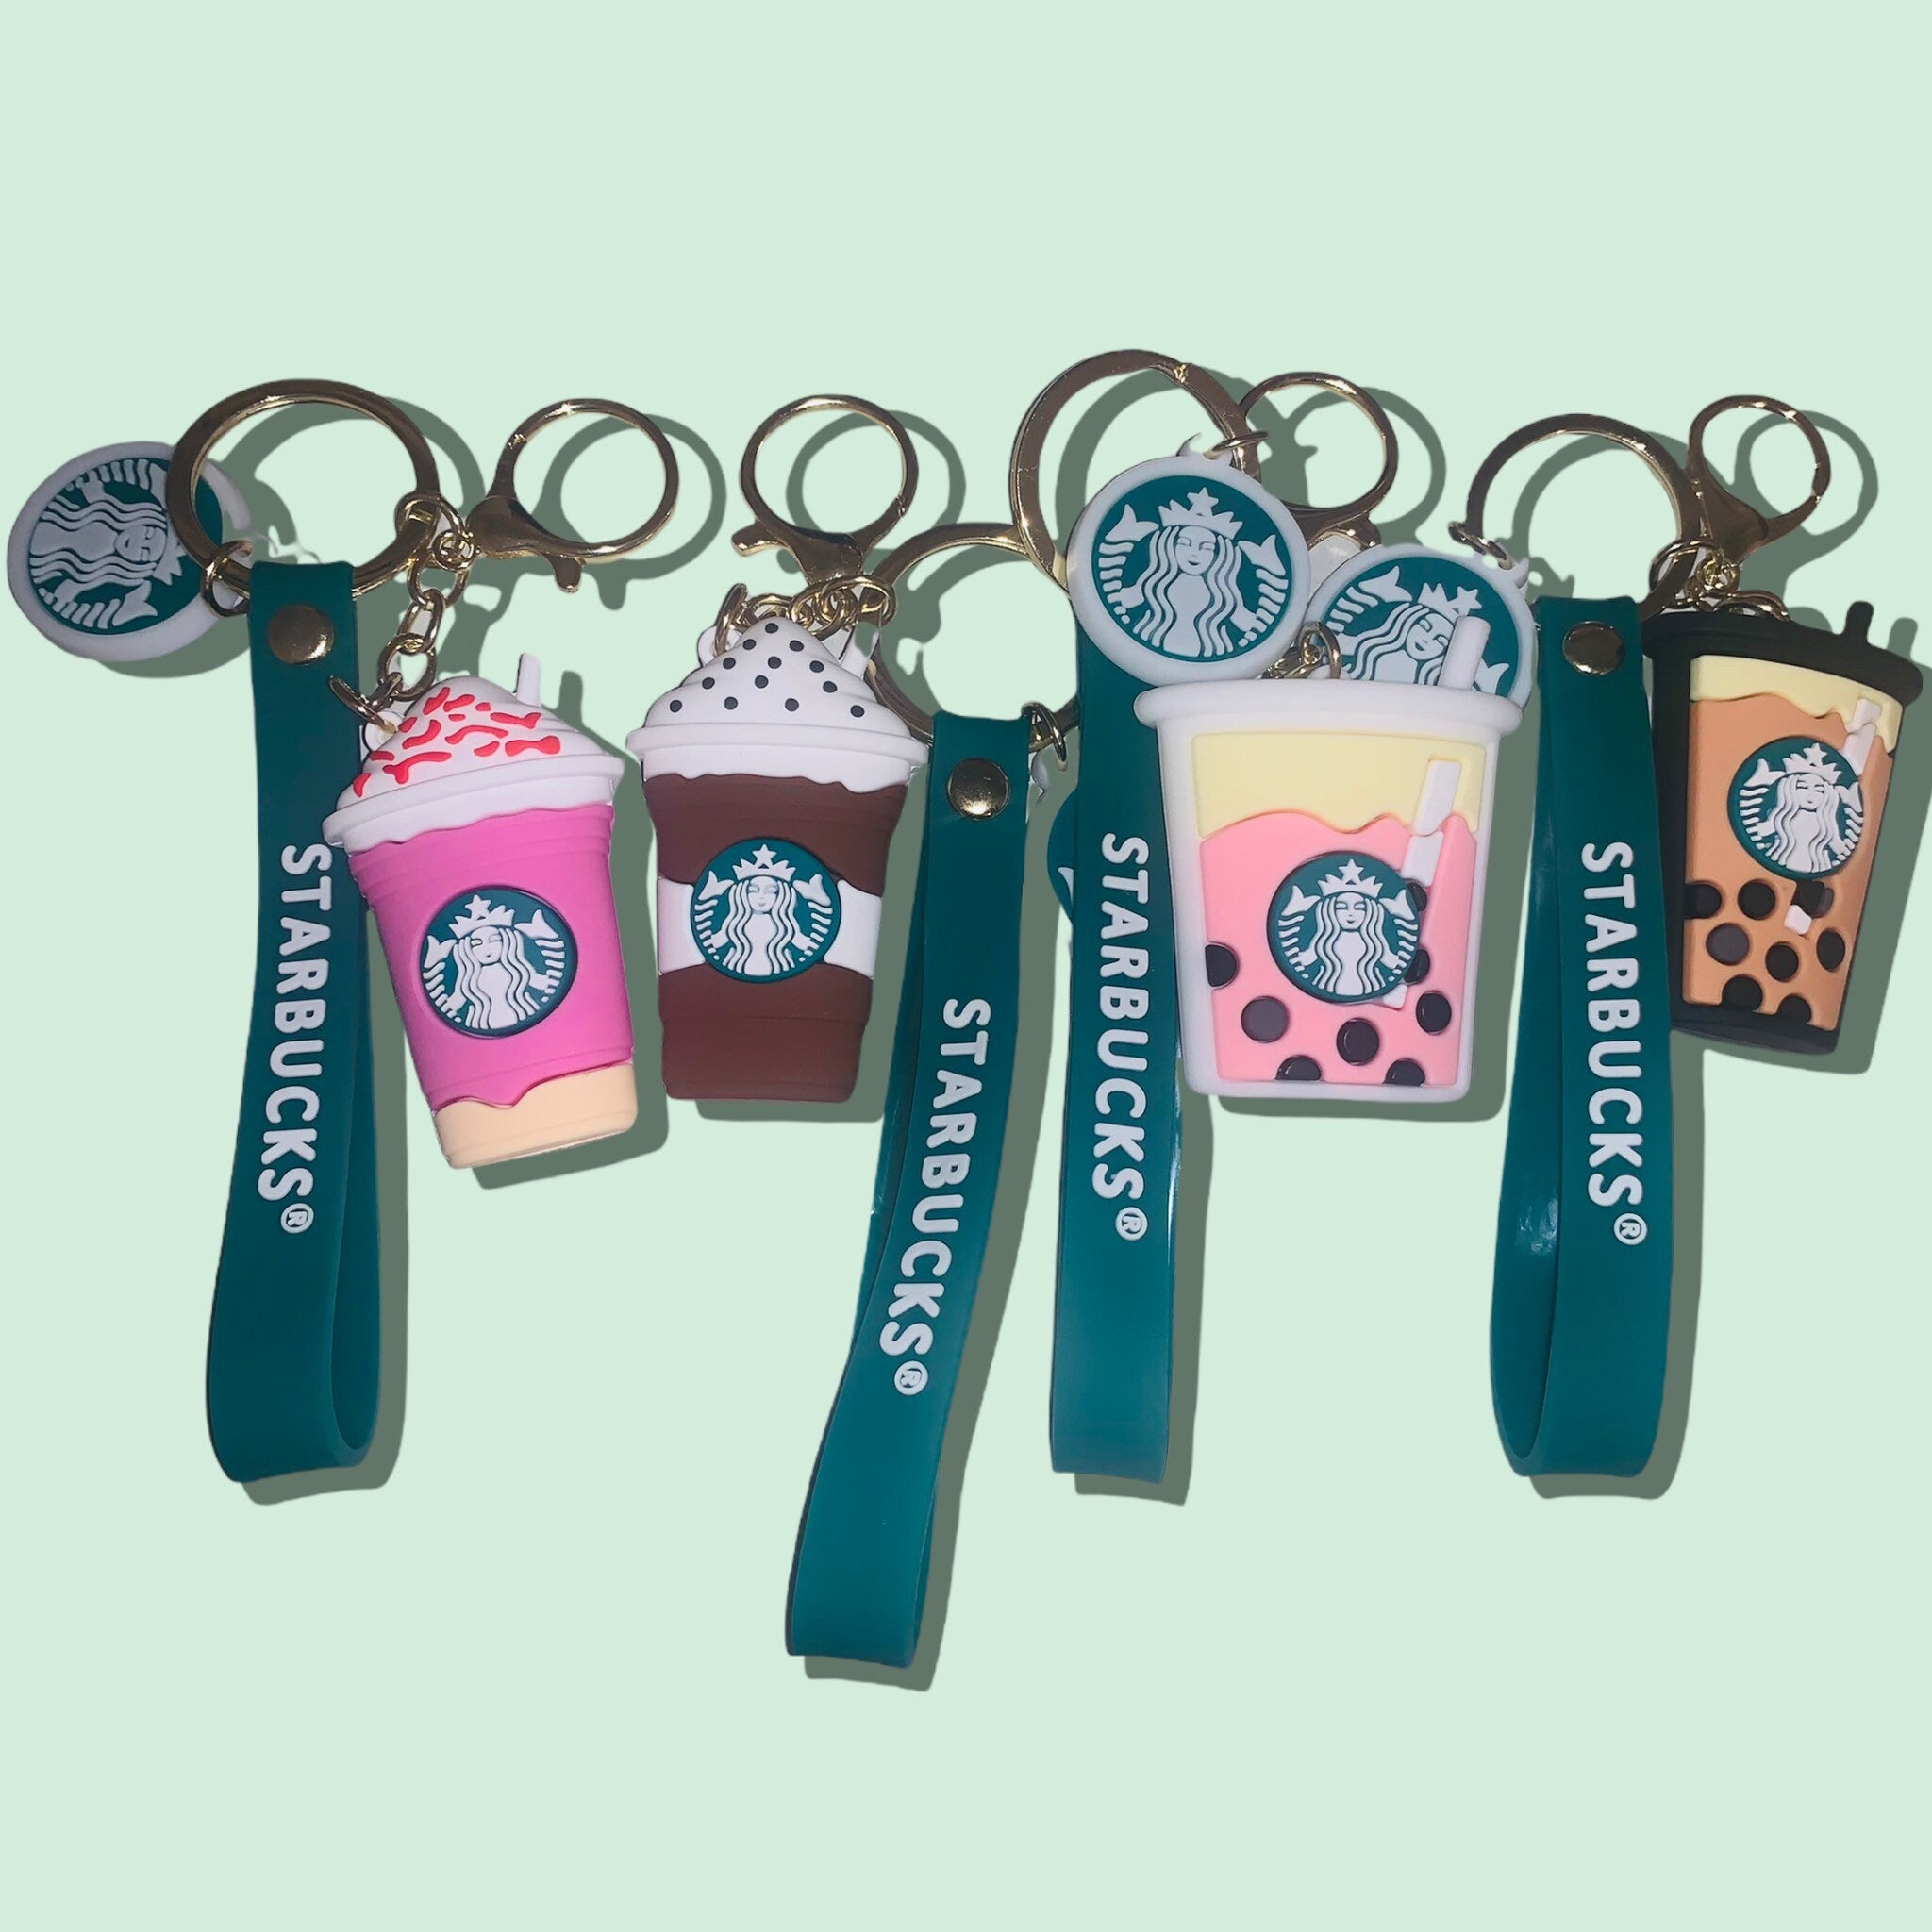 Studded Venti Cafe Cup 3D Printed Keychain, Starbucks Keychain, Venti Cup  Keychain, Frappuccino Keychain, Starbucks Accessories